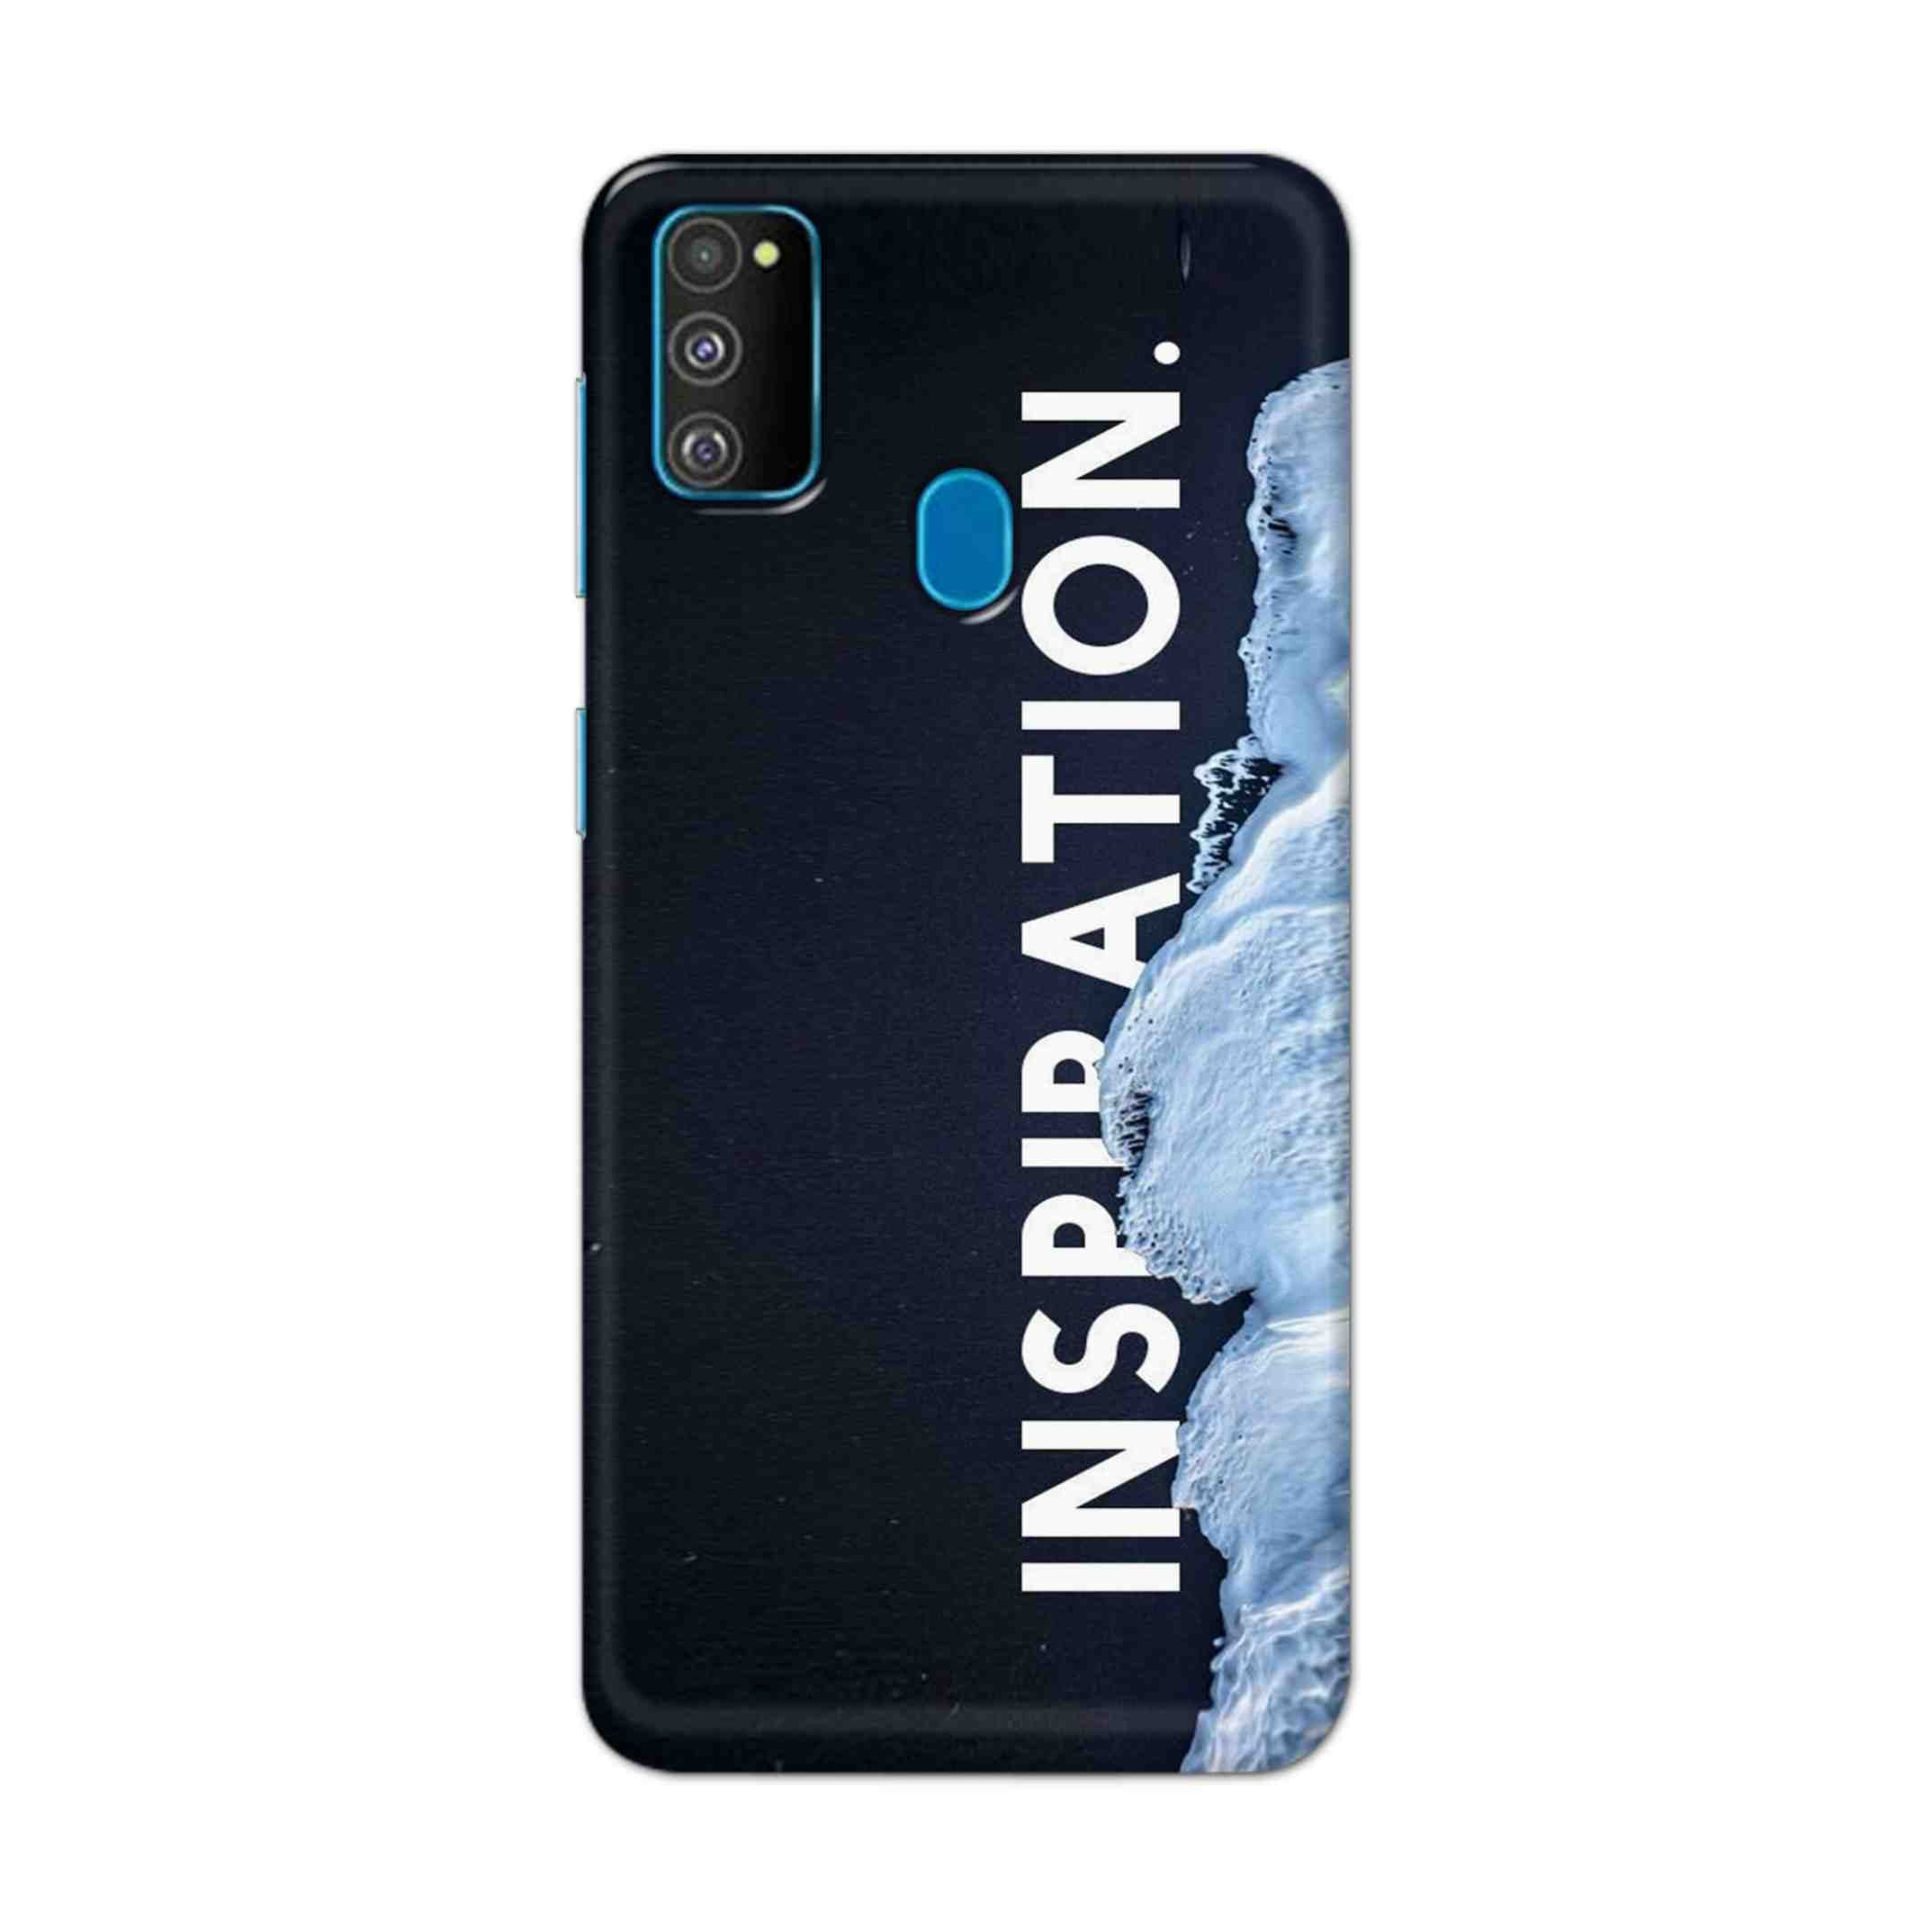 Buy Inspiration Hard Back Mobile Phone Case Cover For Samsung Galaxy M30s Online